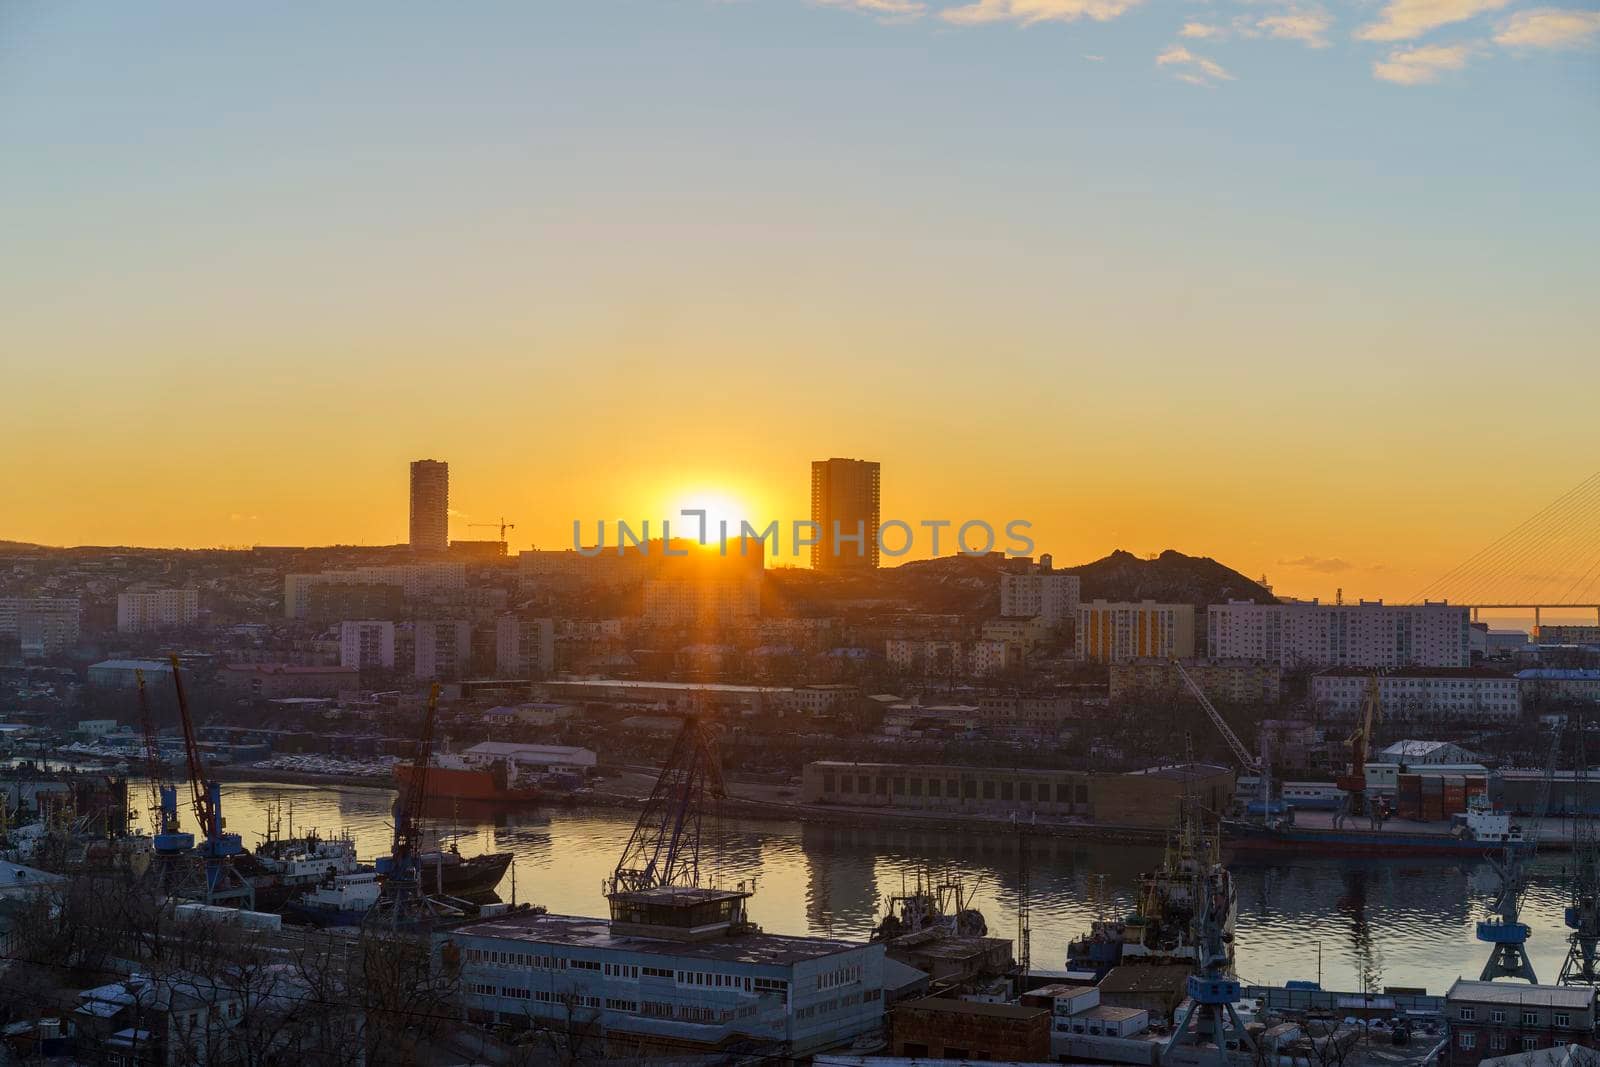 Diomid port at dawn. Vladivostok, Russia by Vvicca